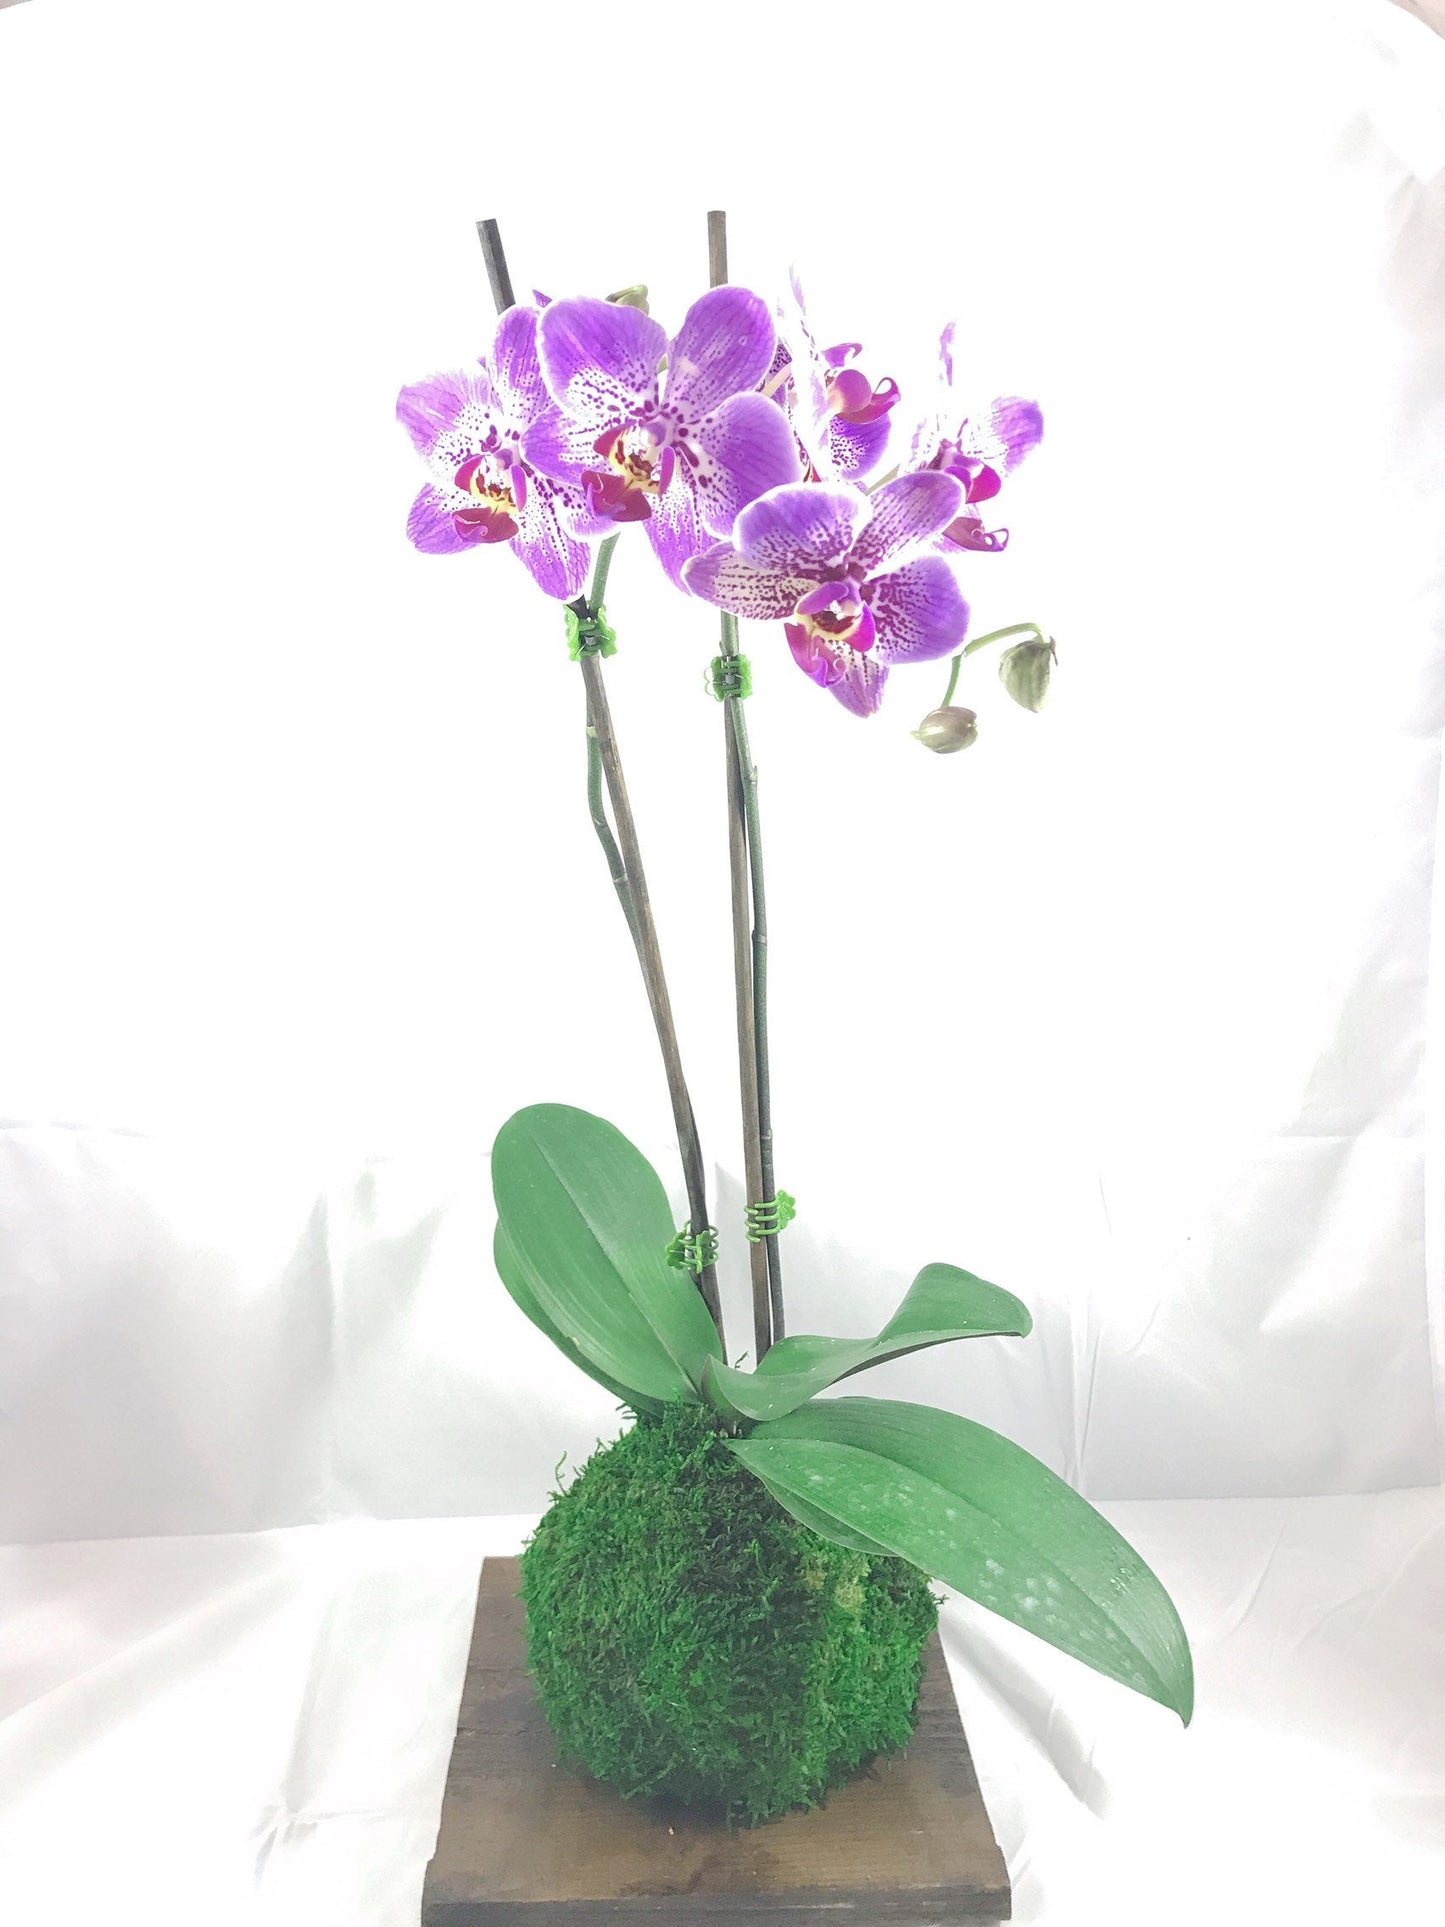 Kokedama - Moss ball, Purple beautiful orchid. Great for Mother's day gift!